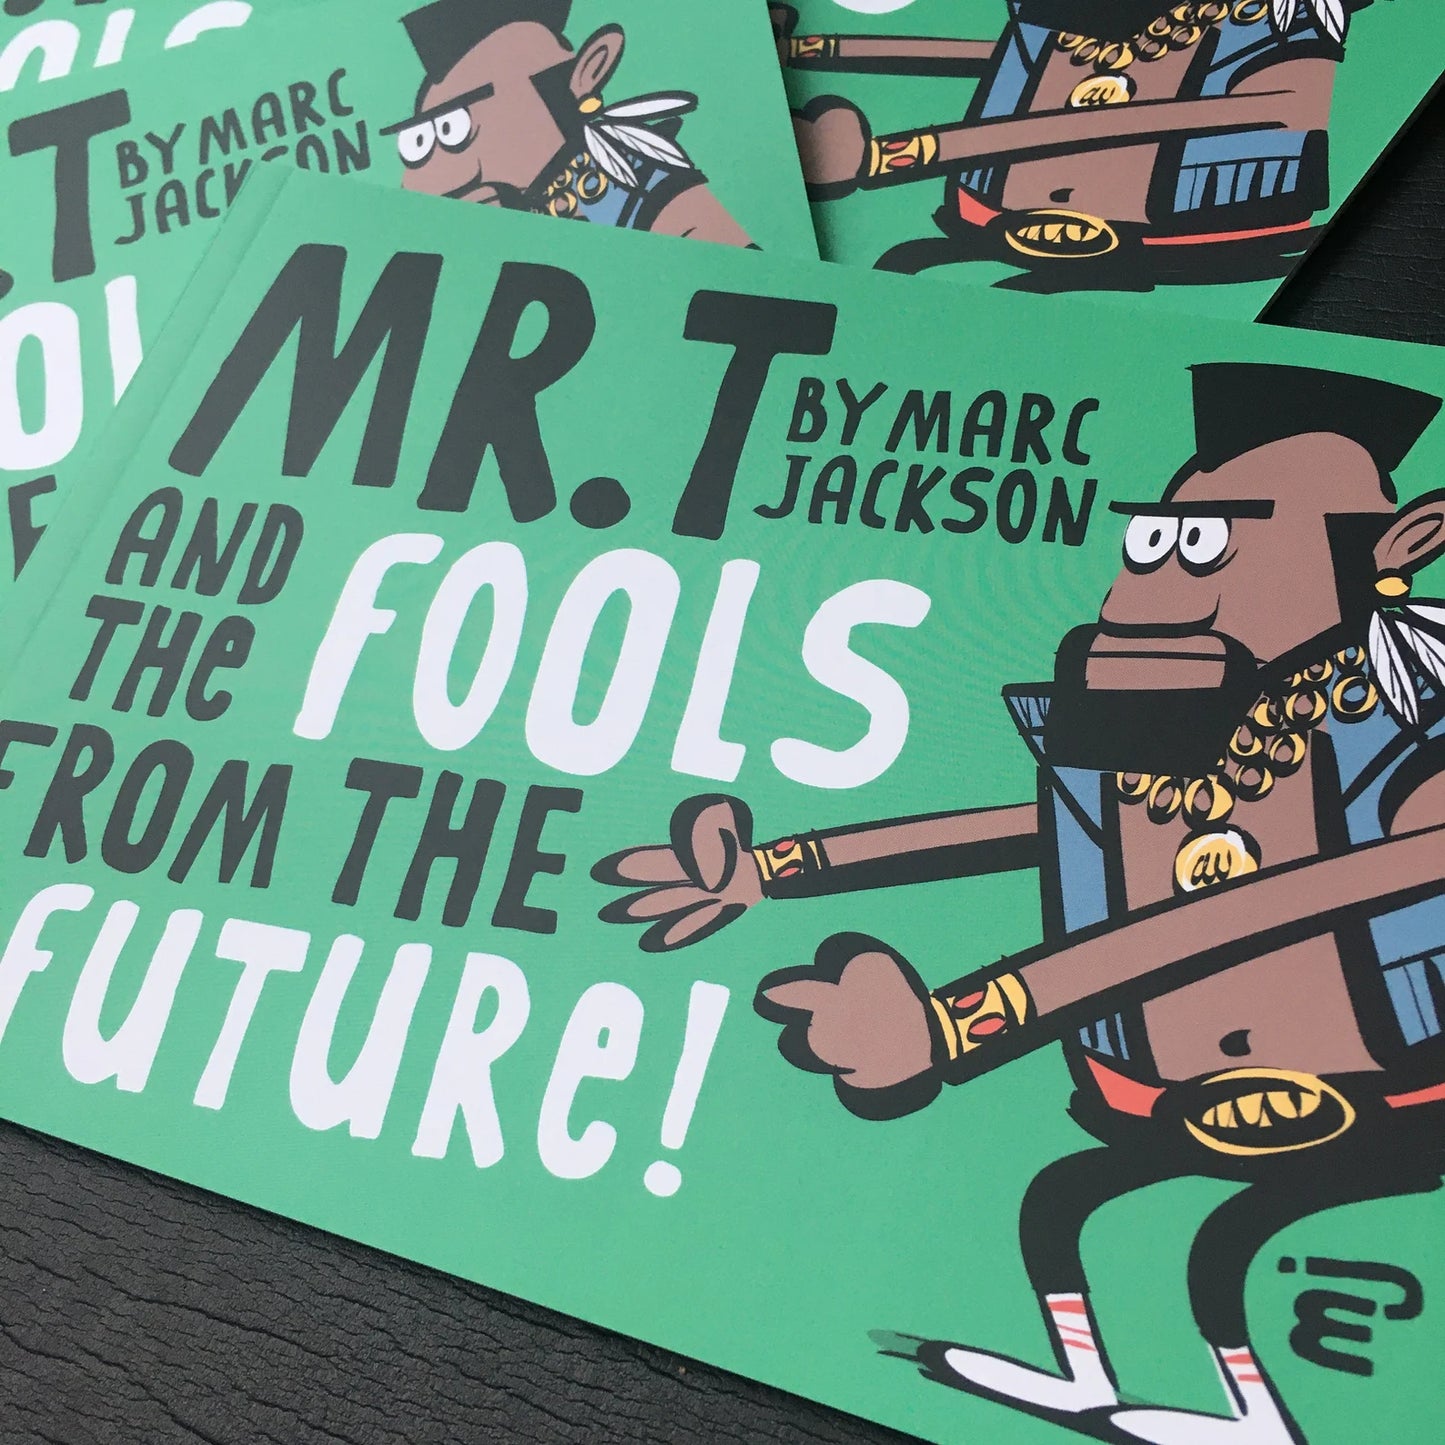 Mr.T & the Fools from the Future Comic